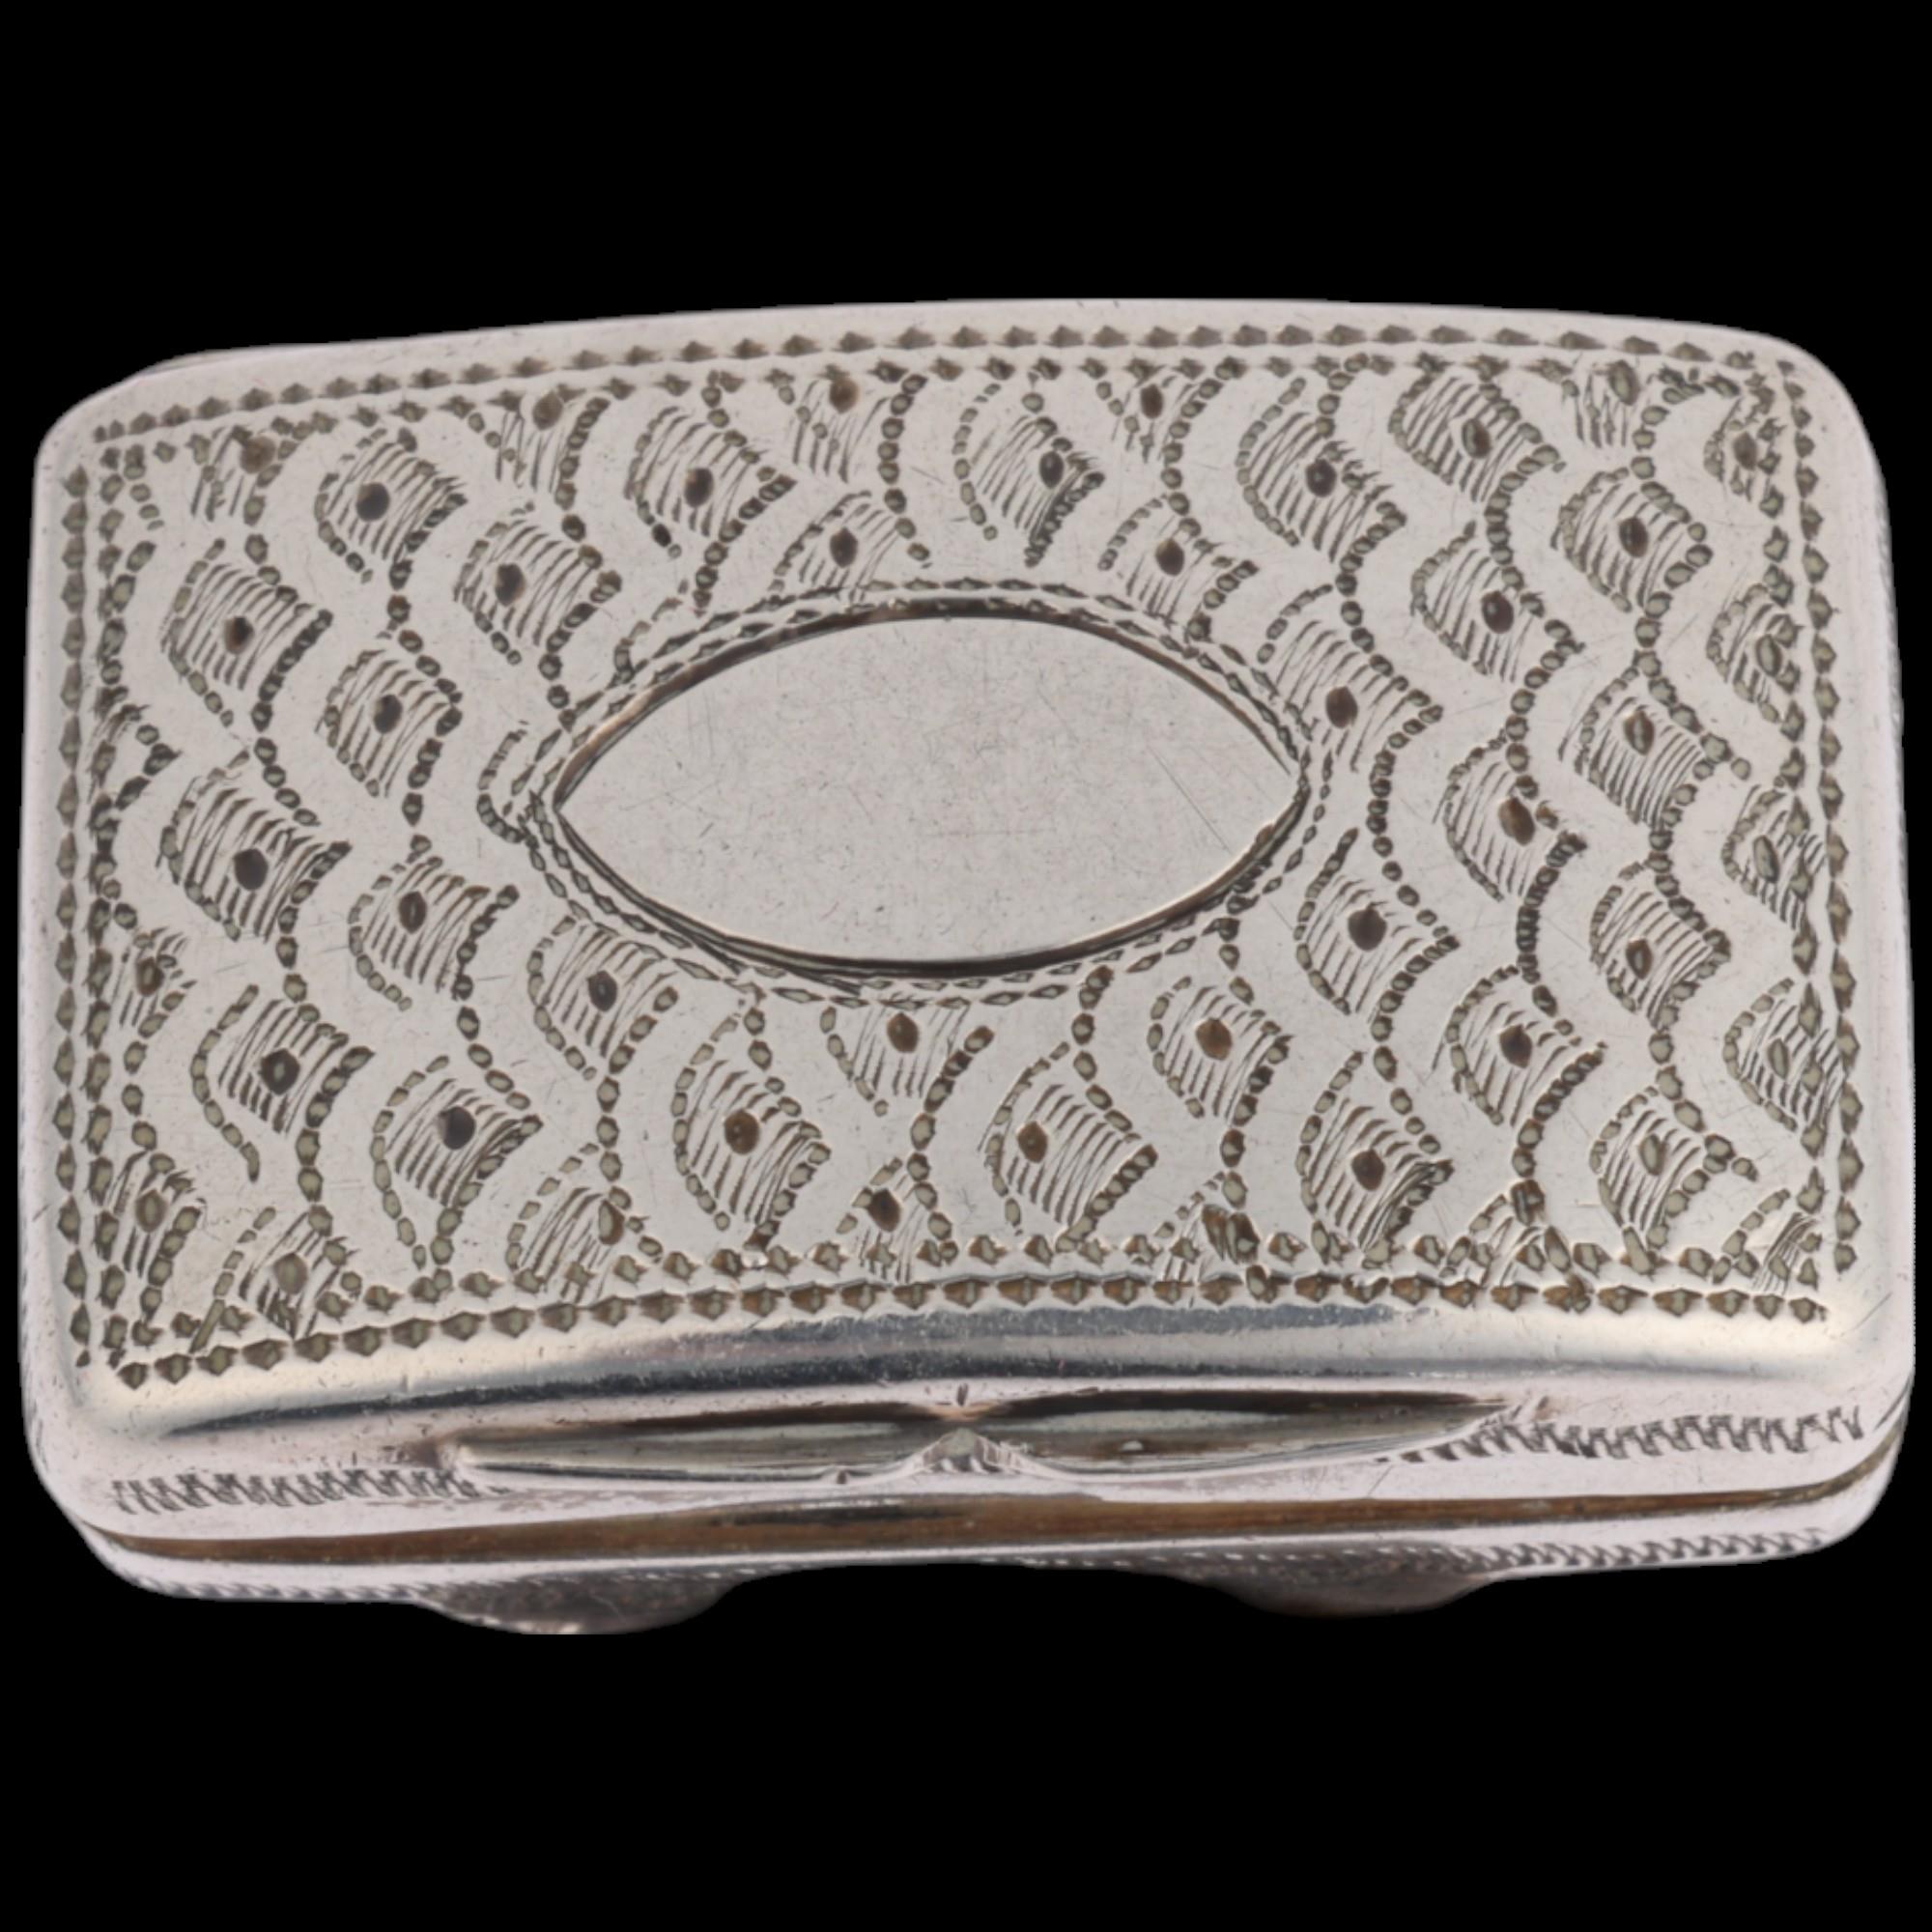 A George IV silver vinaigrette, maker TS, Birmingham 1822, curved rectangular form, with bright-